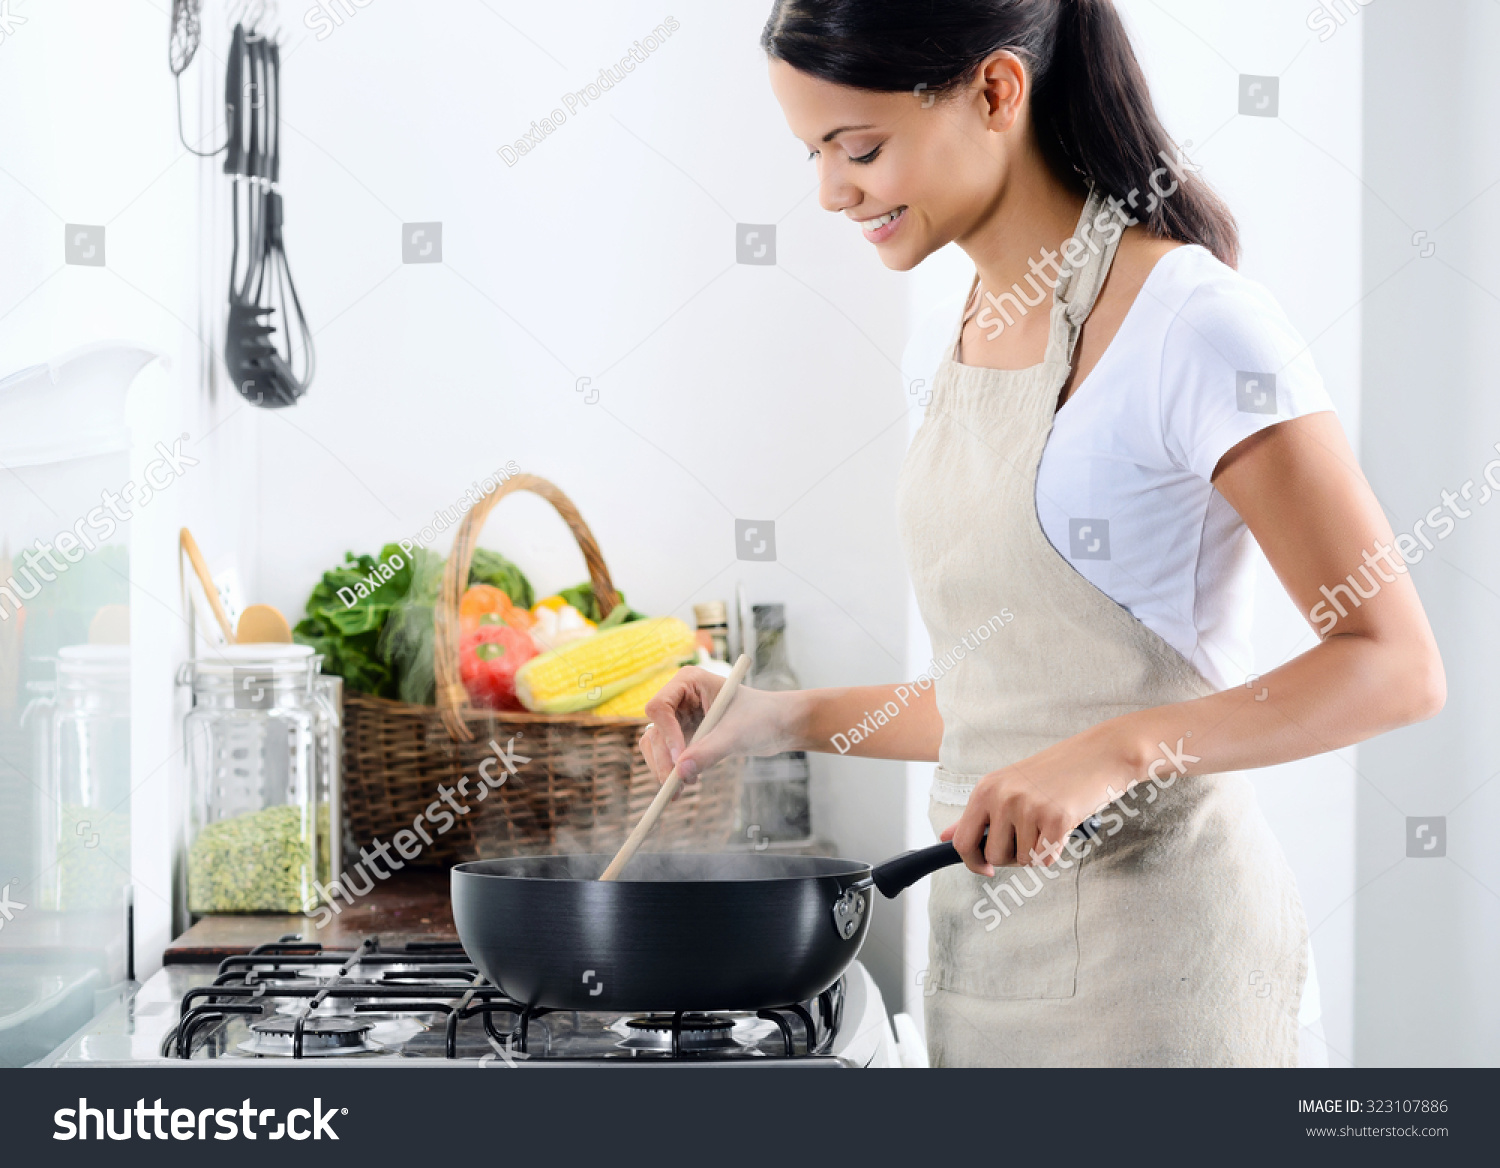 Woman standing by the stove in the kitchen, cooking and smelling the nice aromas from her meal in a pot #323107886